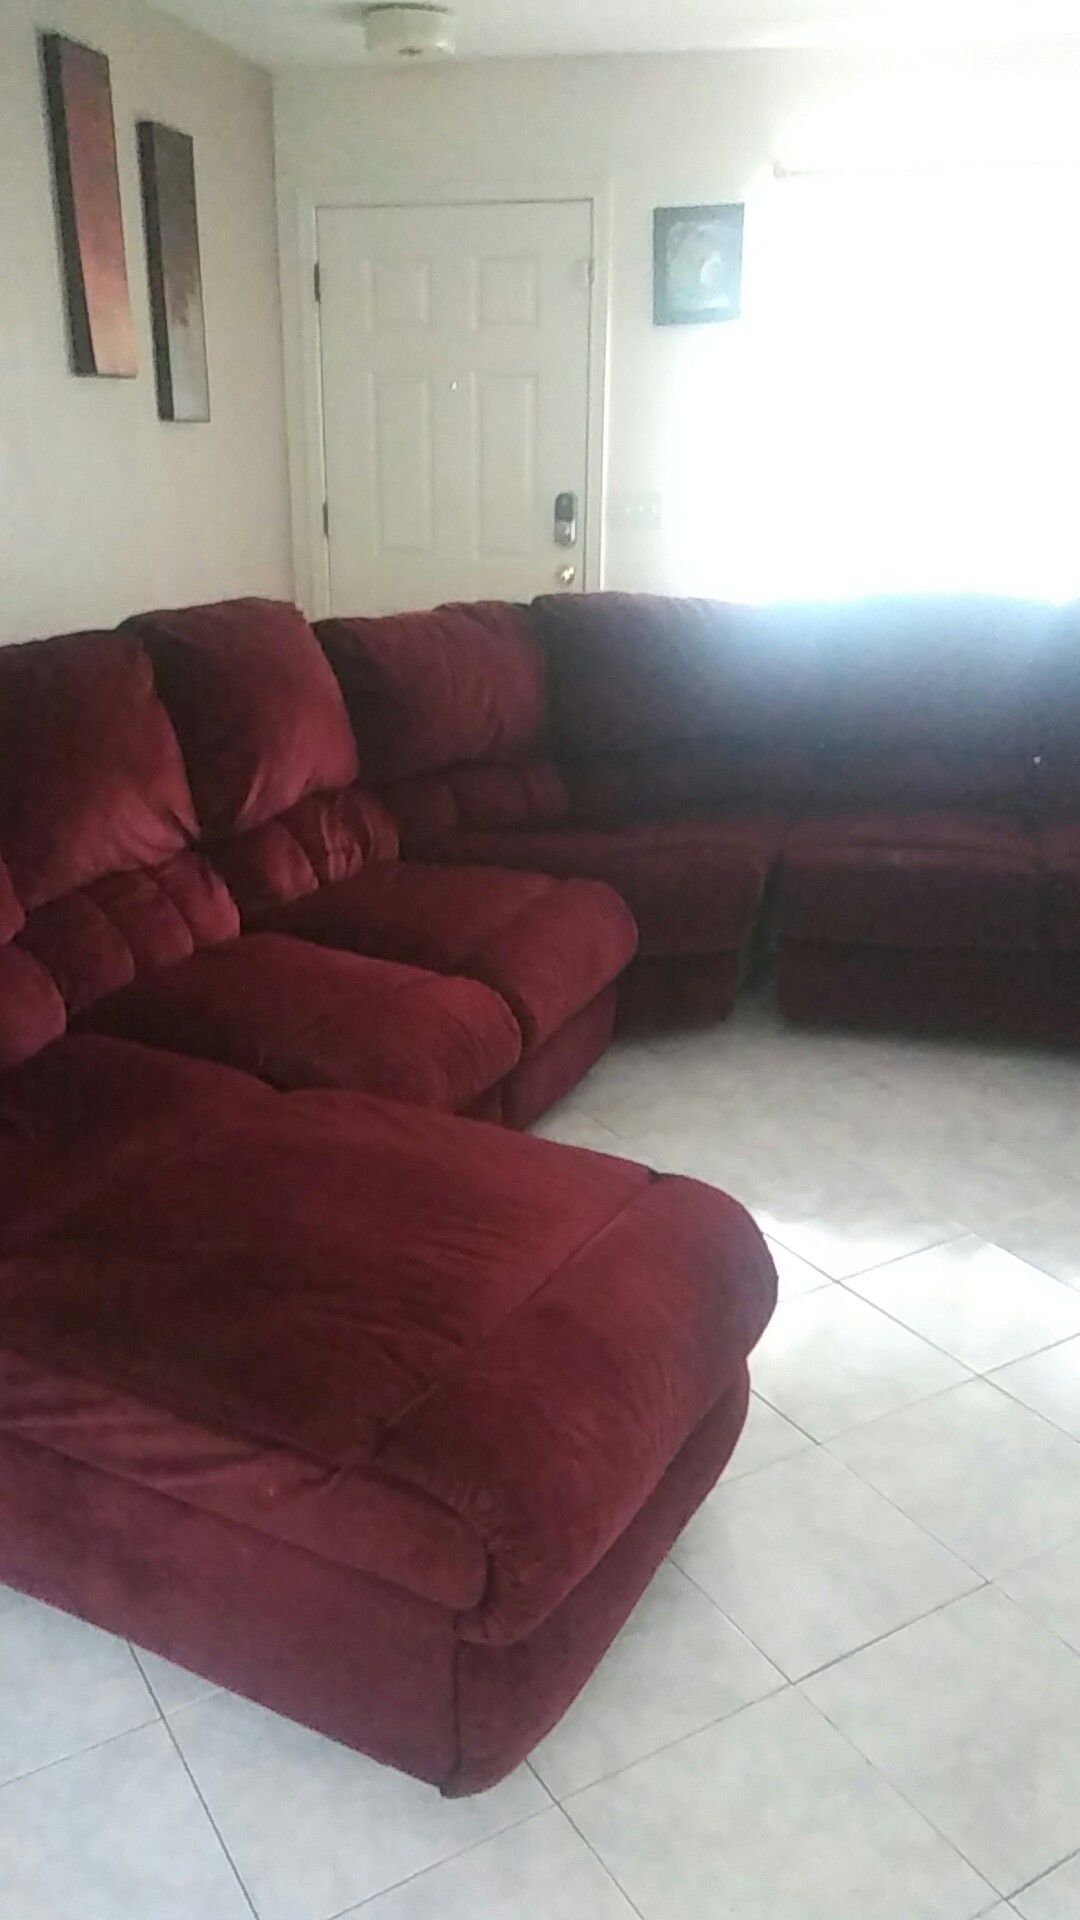 Seccional couch. In good condition 4 piesas of microfibers to pick up and cash only para recojer in en efectivo